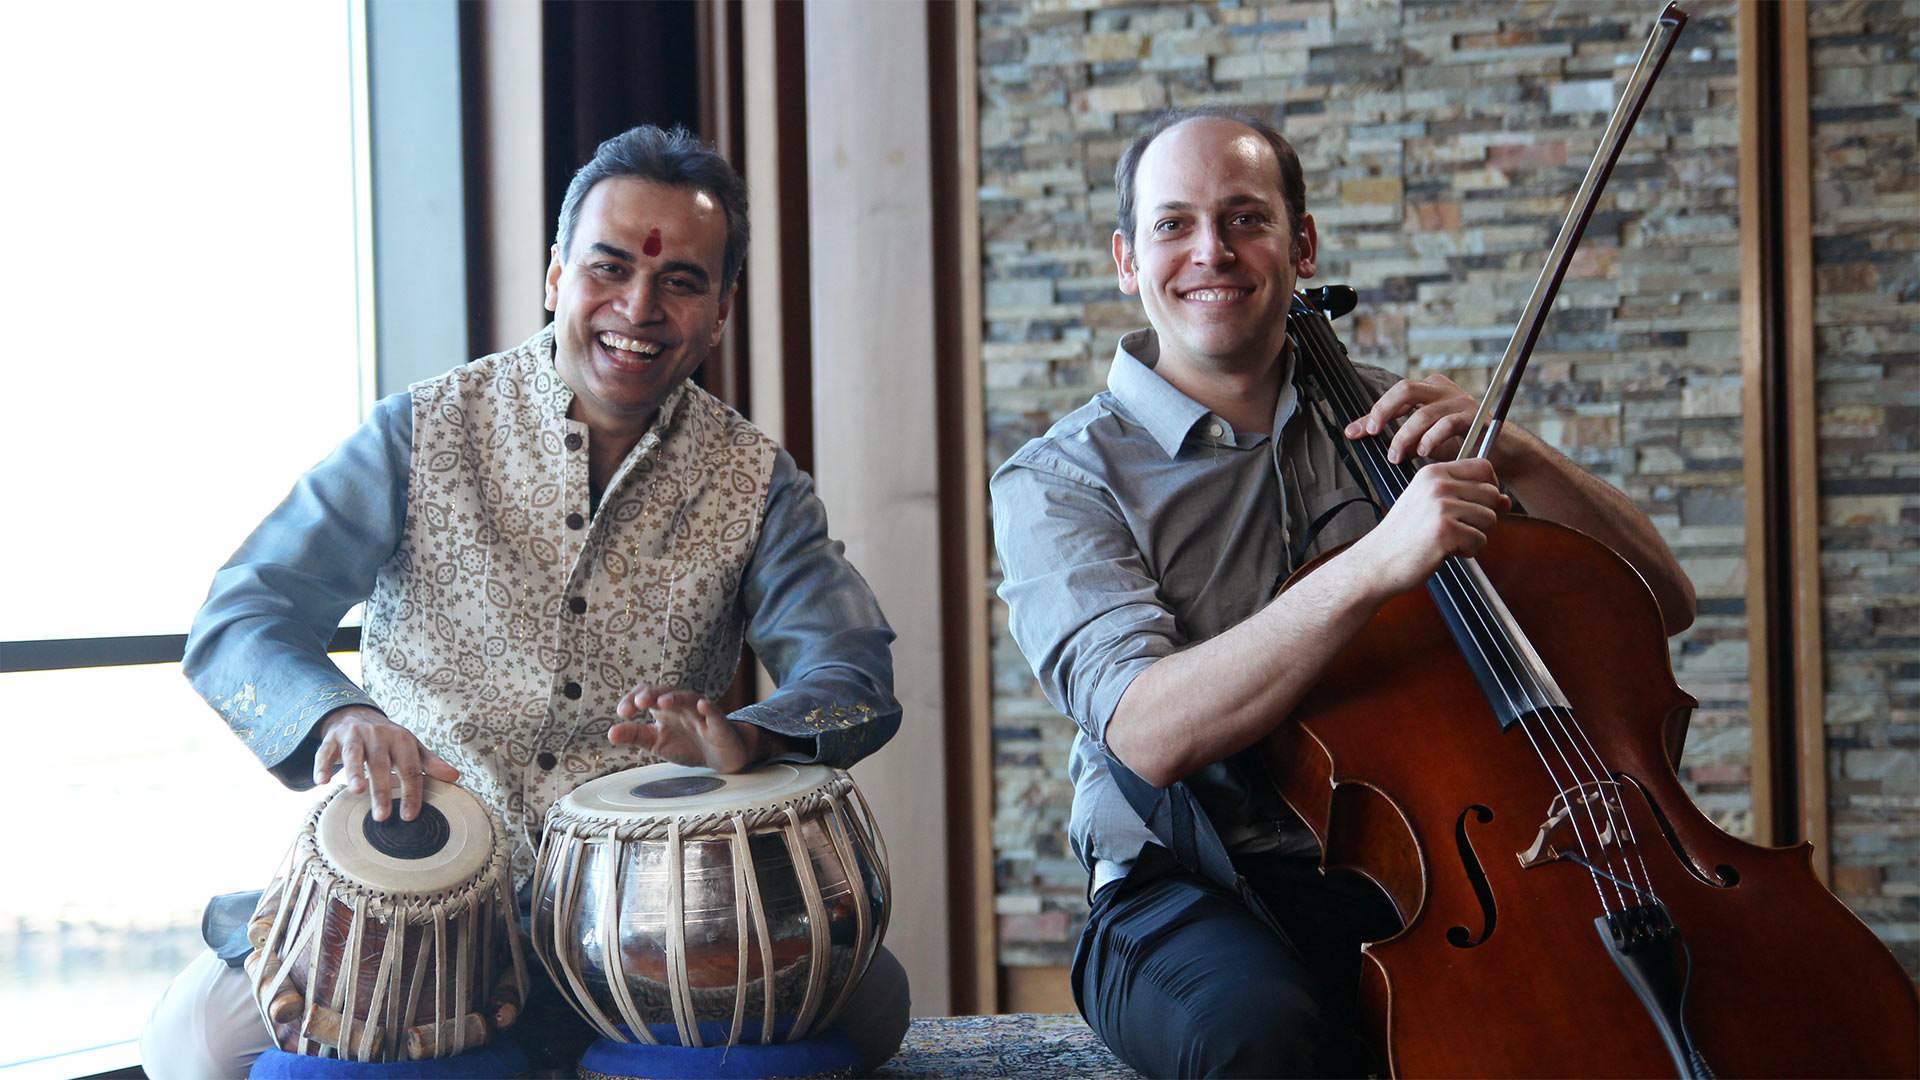 Color image of Sandeep Das playing the tabla, an Indian drum, on the left and Mike Block playing the cello on the right.